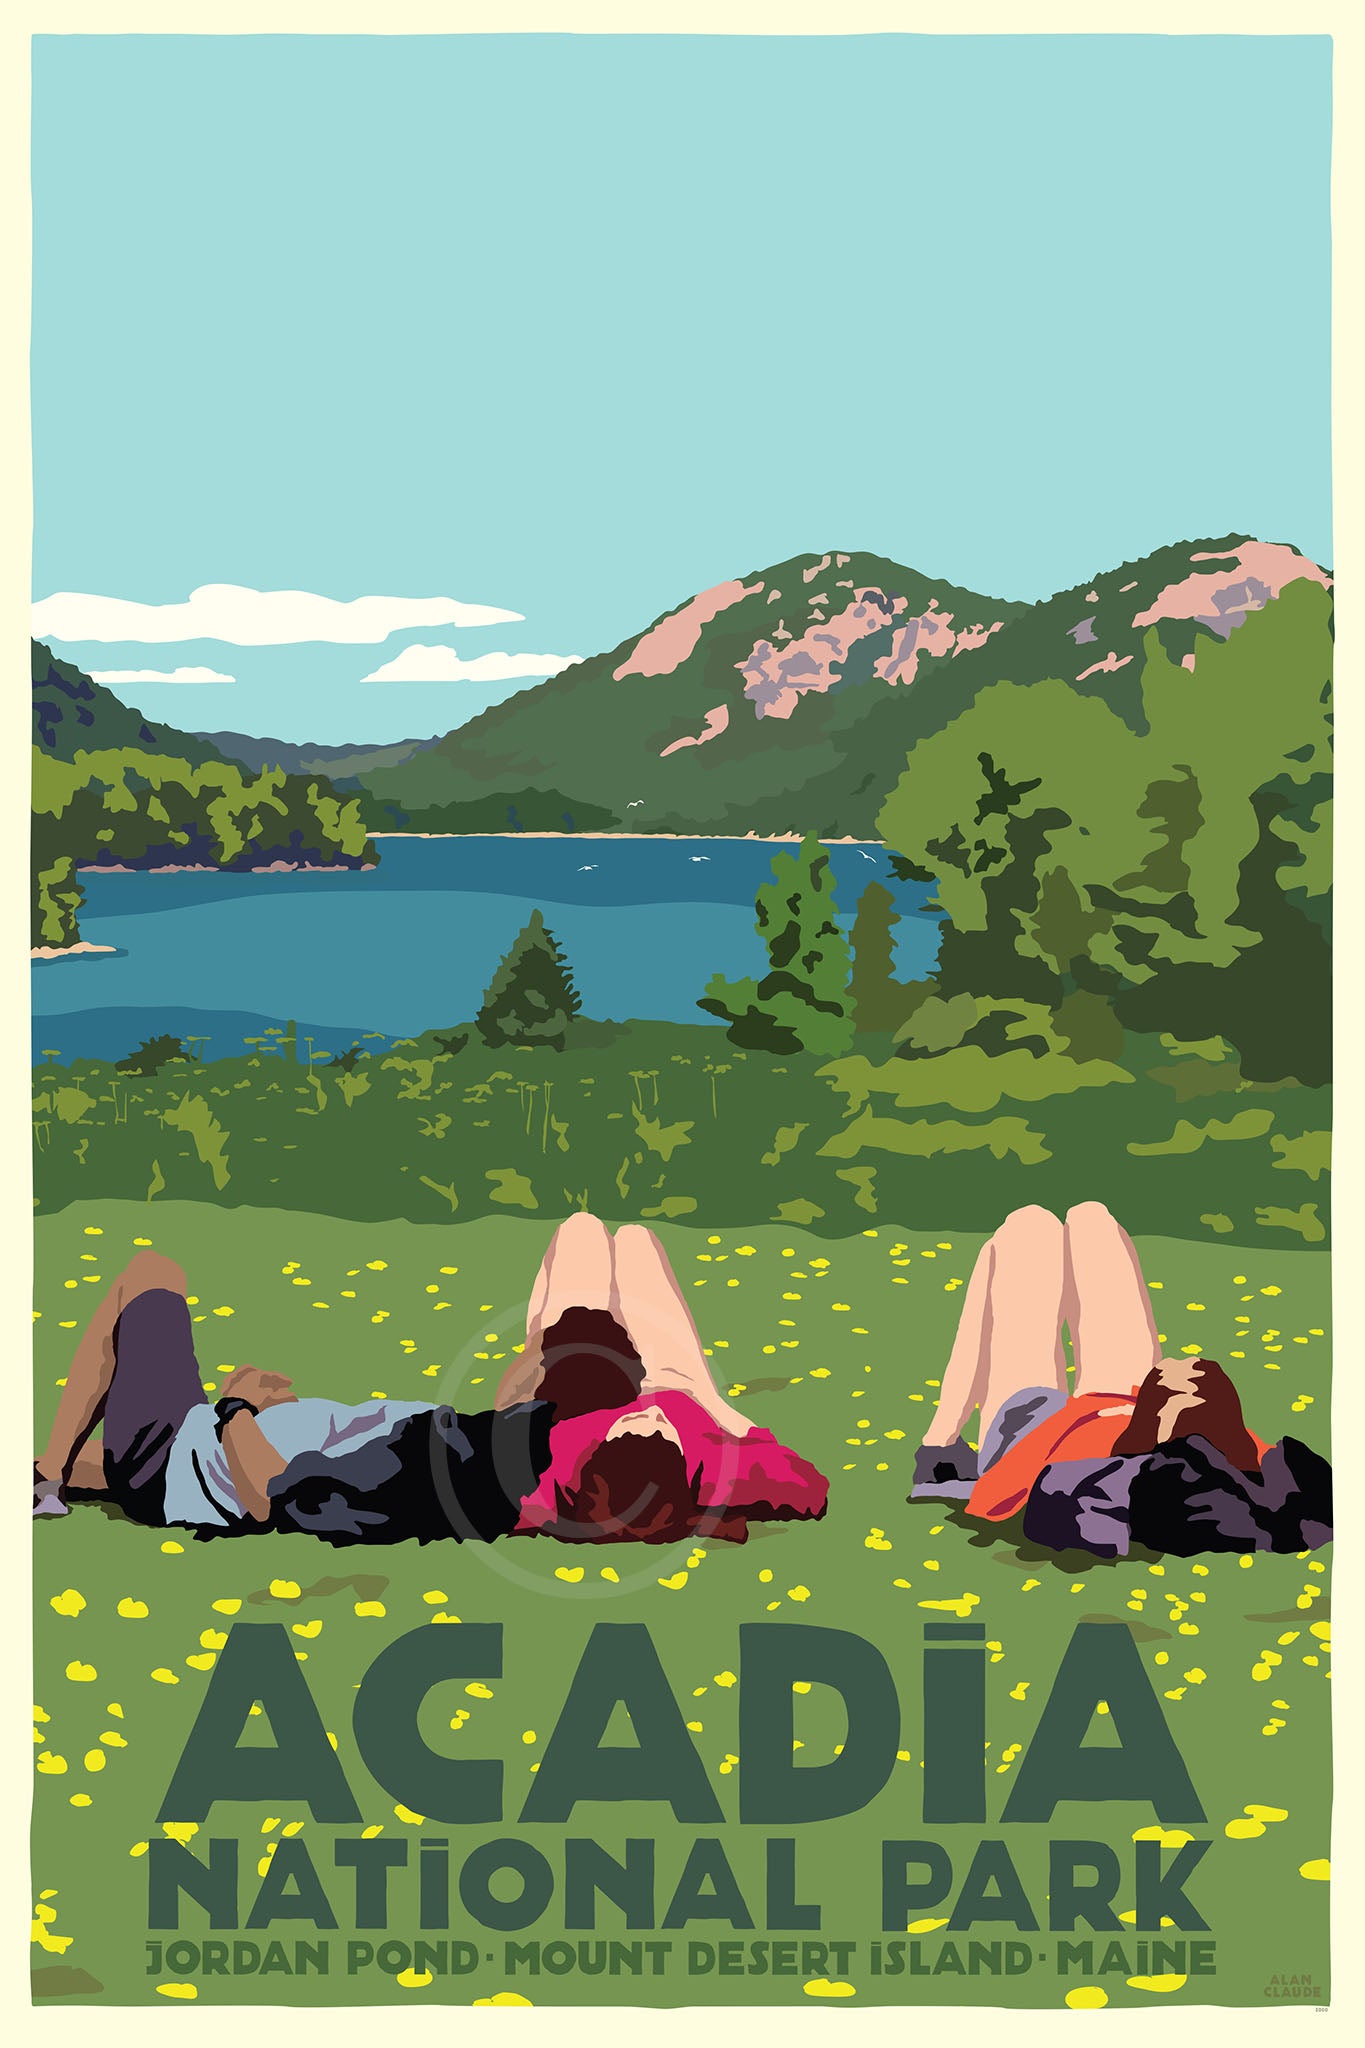 Hikers in Acadia National Park Art Print 24" x 36" Wall Poster By Alan Claude - Maine